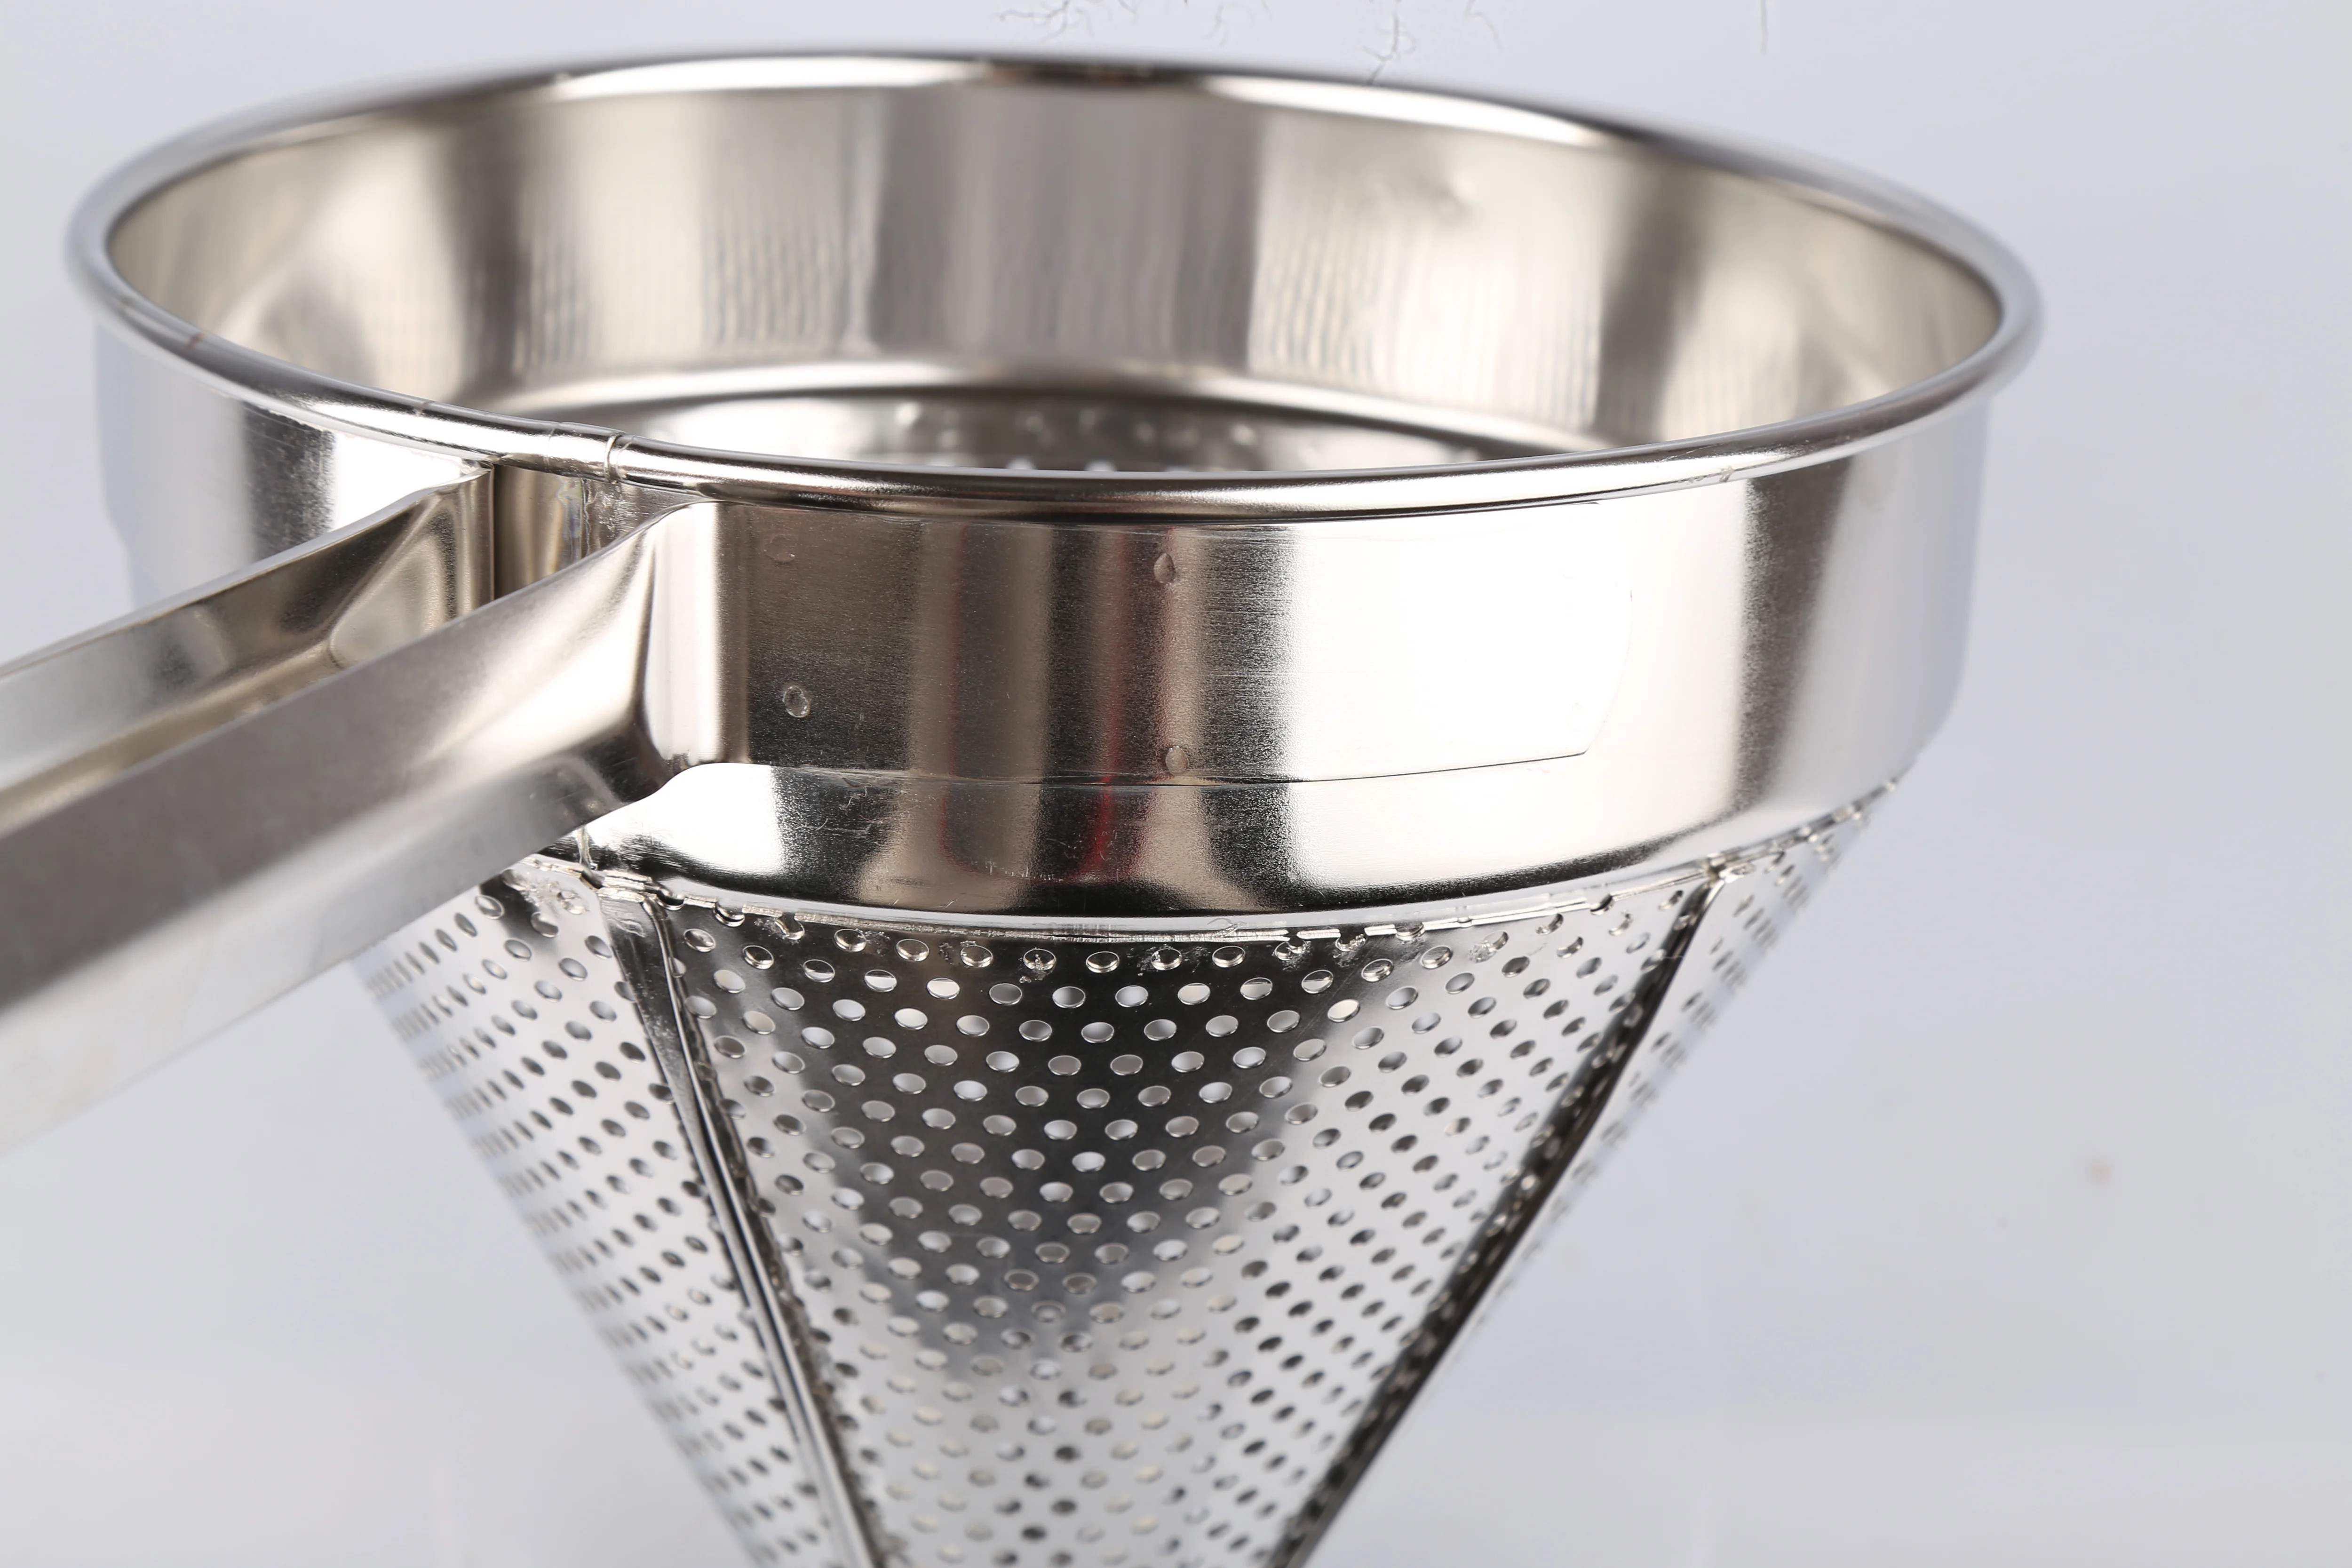 a aulife stainless steel kitchen sink strainer